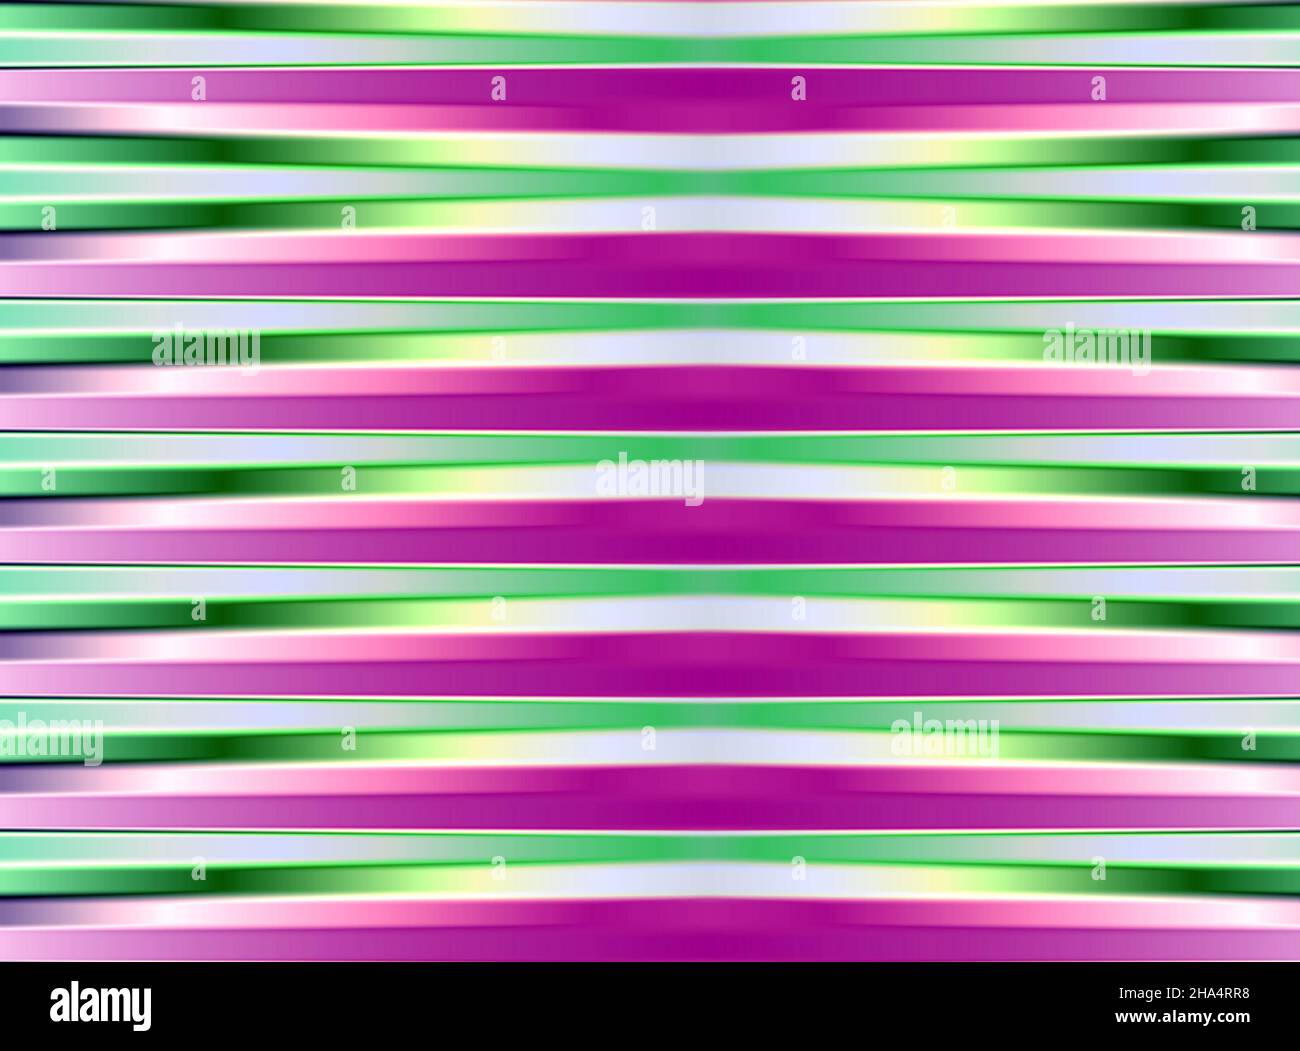 Abstract advertising, purple green white gradient blurred fluorescent dynamic horizontal  decorative modern background Stock Photo